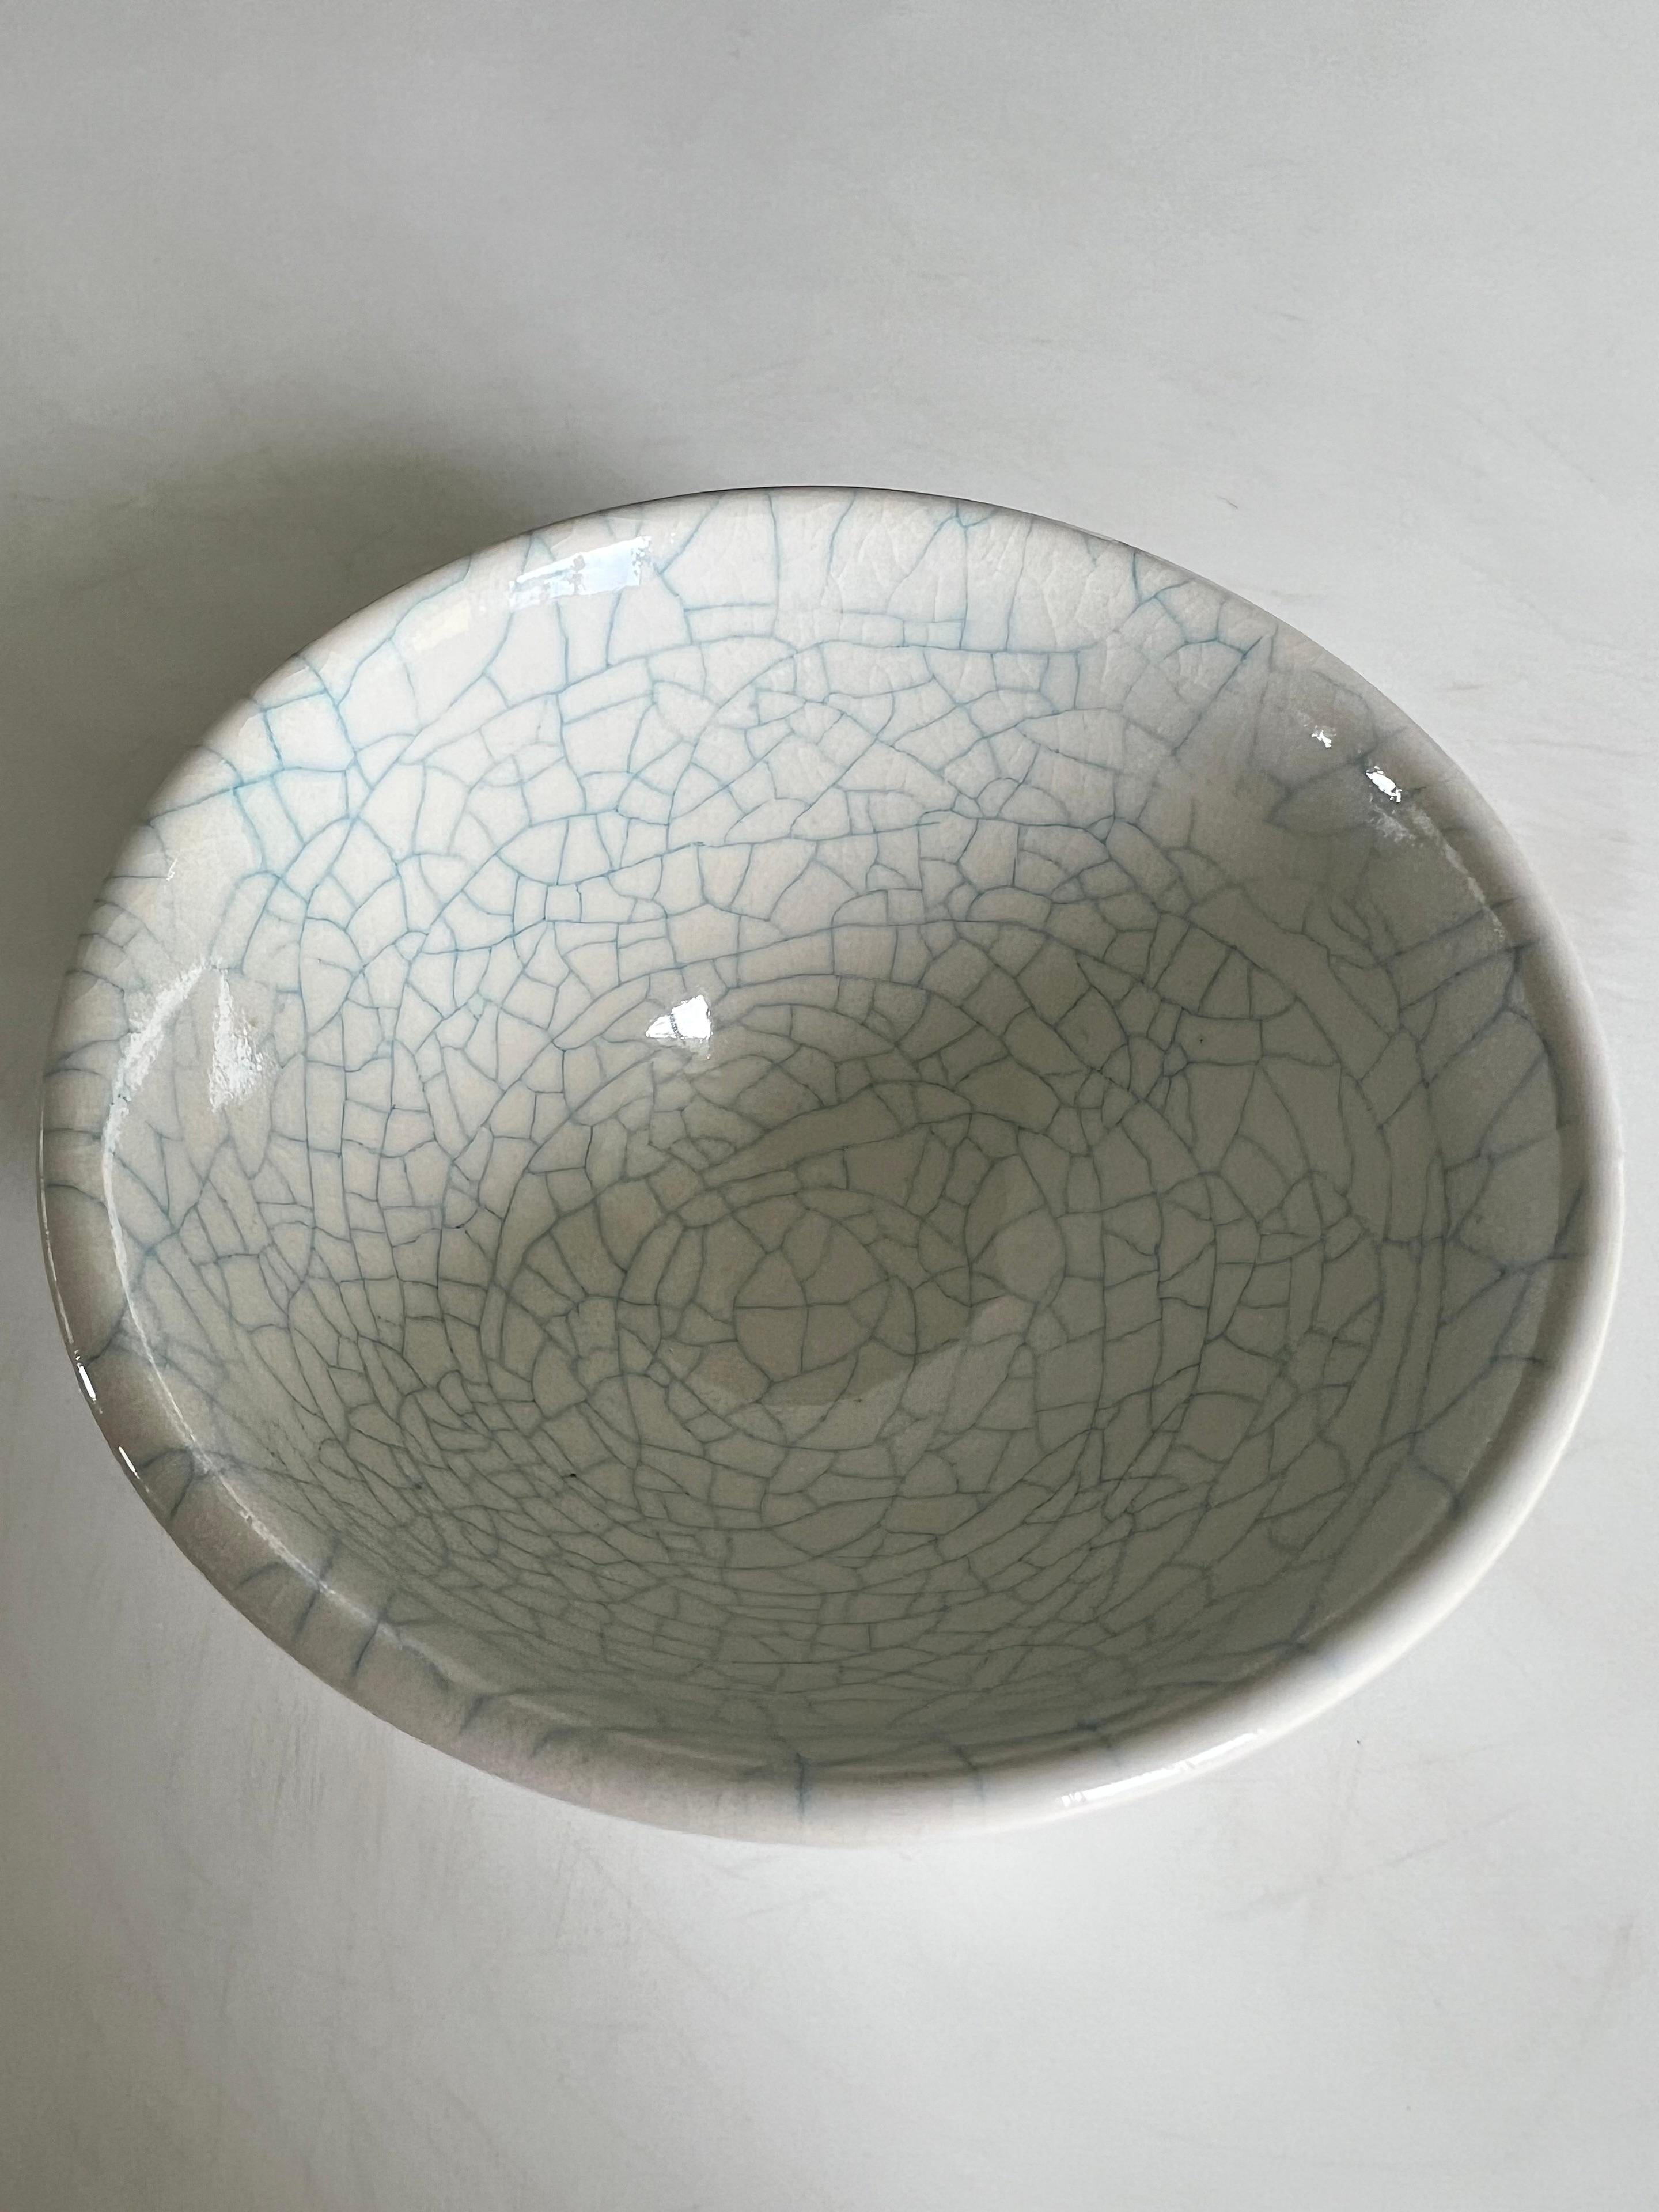 Ceramic 12
Ceramic
10.8cm in diameter, 5.8cm in height

Shin-Young Park is a Korean-born New Zealander who moved to Auckland with her family at 16, and to Singapore in 2006. She completed both her BFA in 1998 and MFA in 2003 at the Elam School of